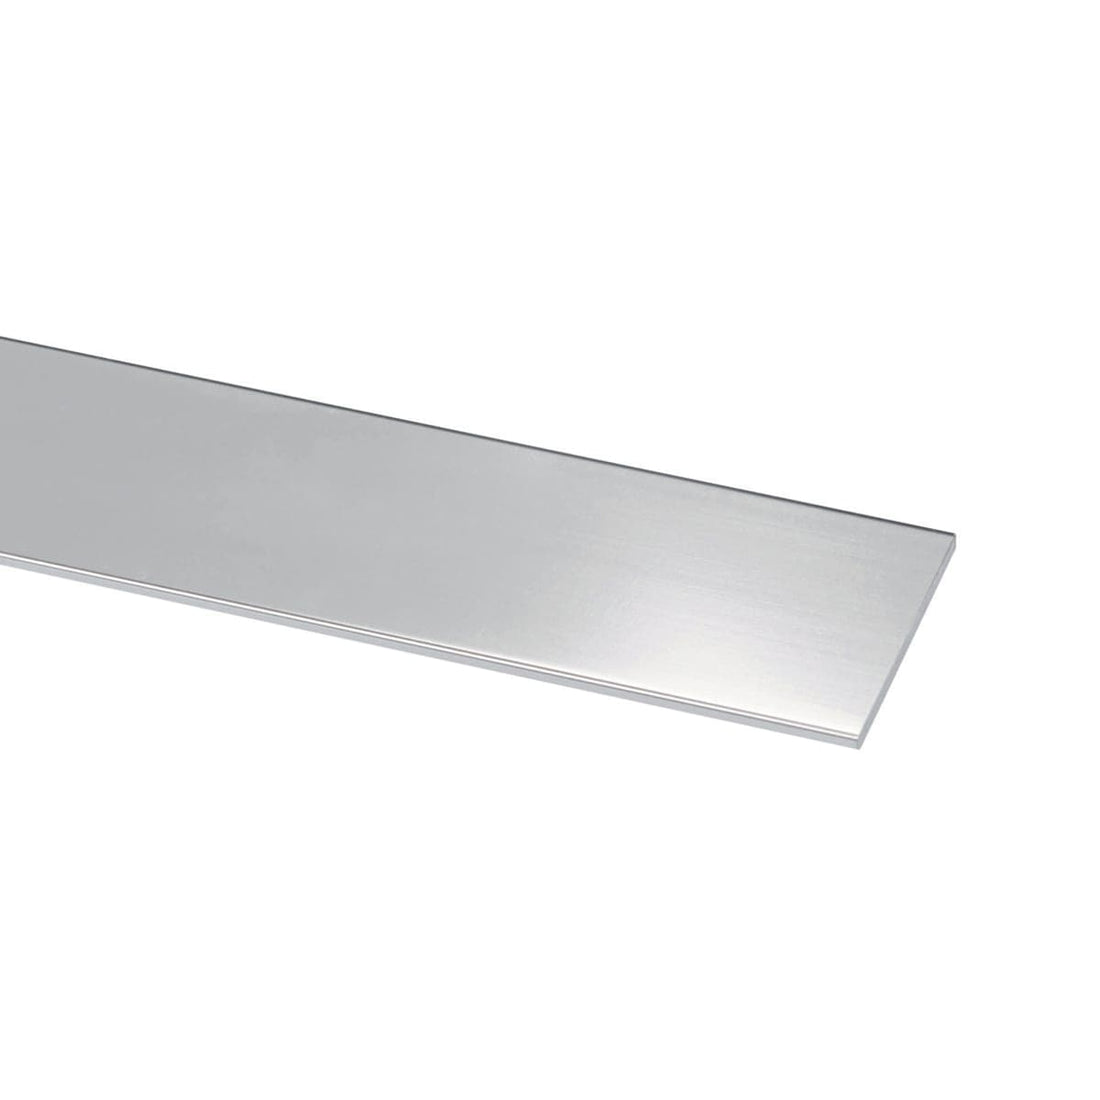 FLAT PROFILE 15X1MM 2MT STAINLESS STEEL AISI 304 - best price from Maltashopper.com BR410003770